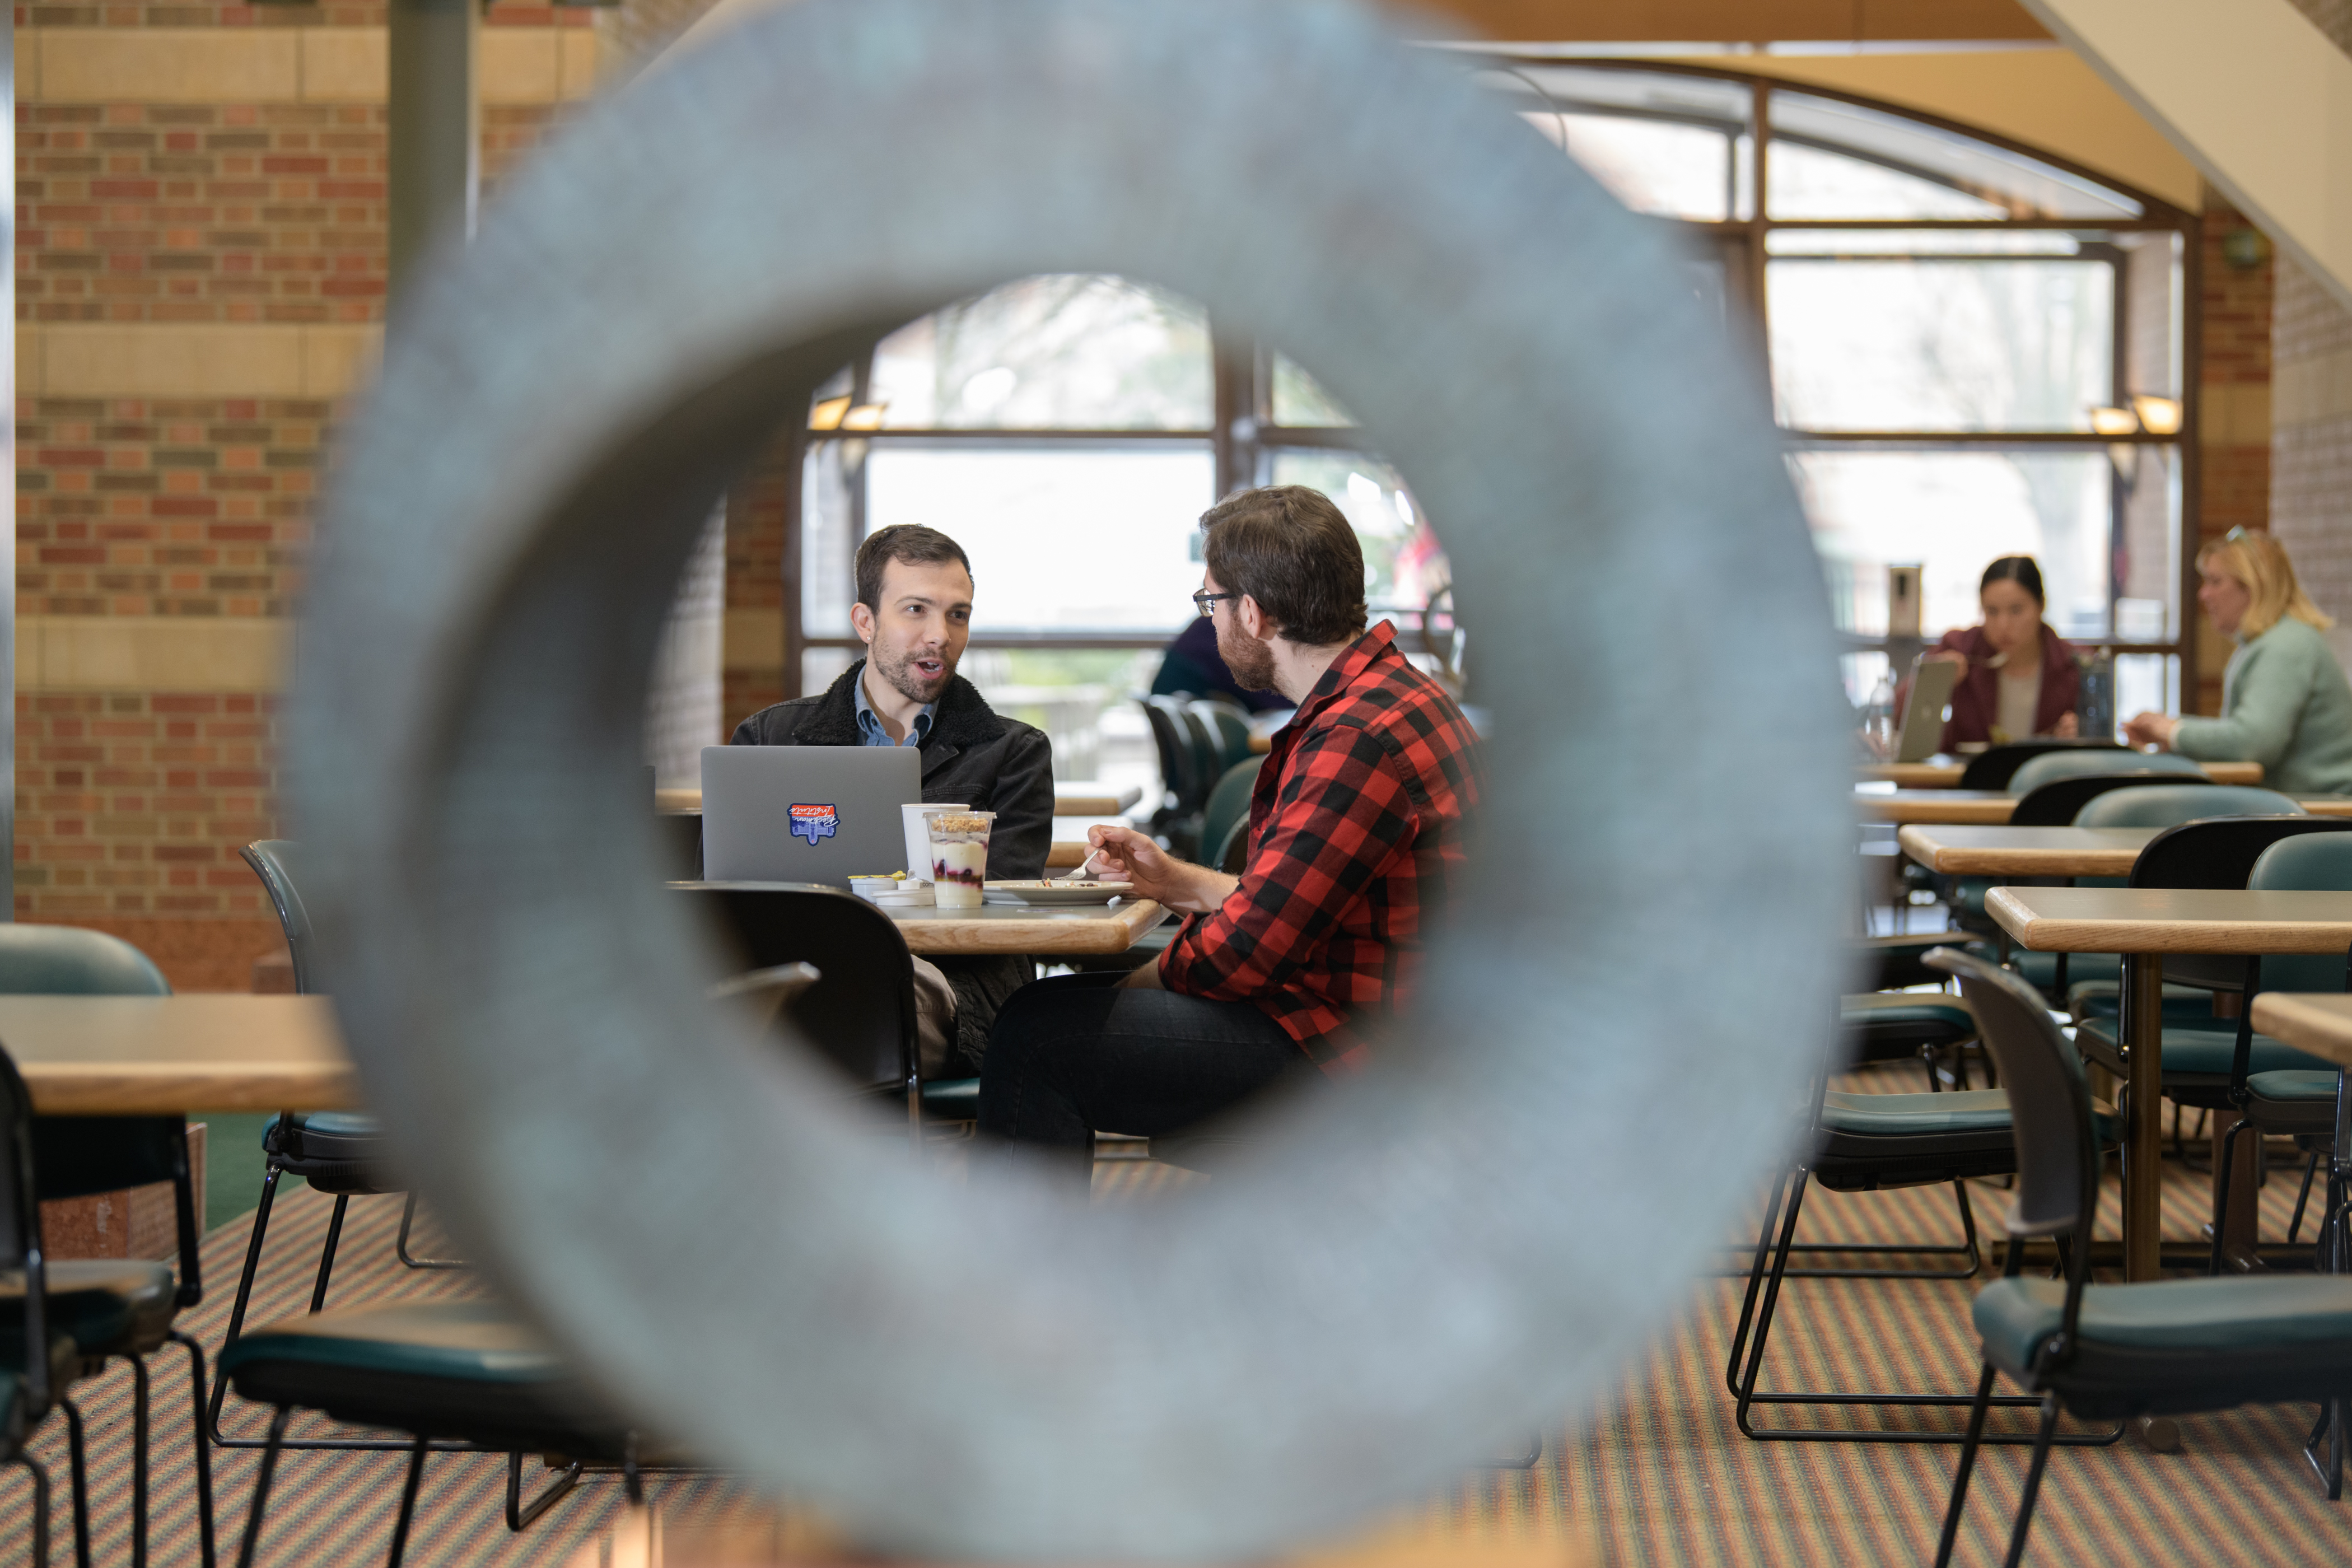 Two Beckman students meet to work and have a bite to eat at the Beckman Café. Captured through the eye of a donut-shaped statue in the Beckman Atrium.